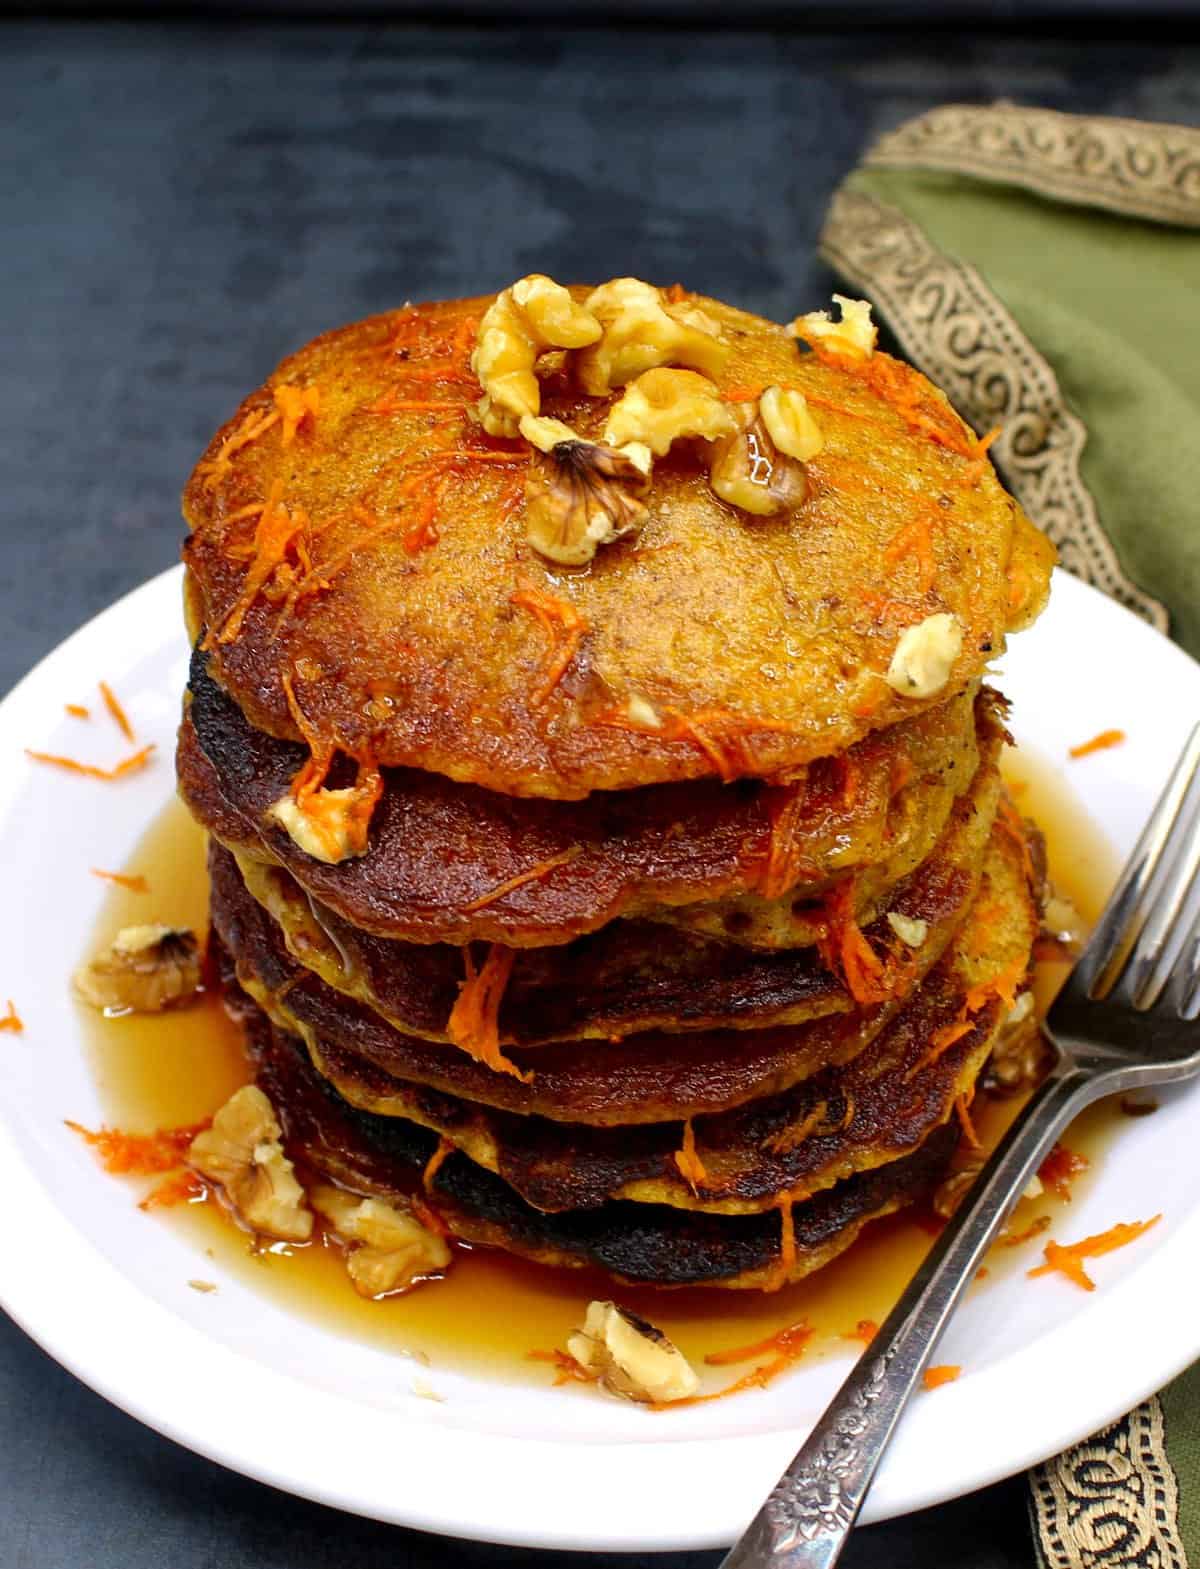 A stack of vegan carrot cake pancakes on a white plate with shredded carrots and chopped walnuts. Next to the pancakes is a silver decorative fork and a green napkin is next to plate.